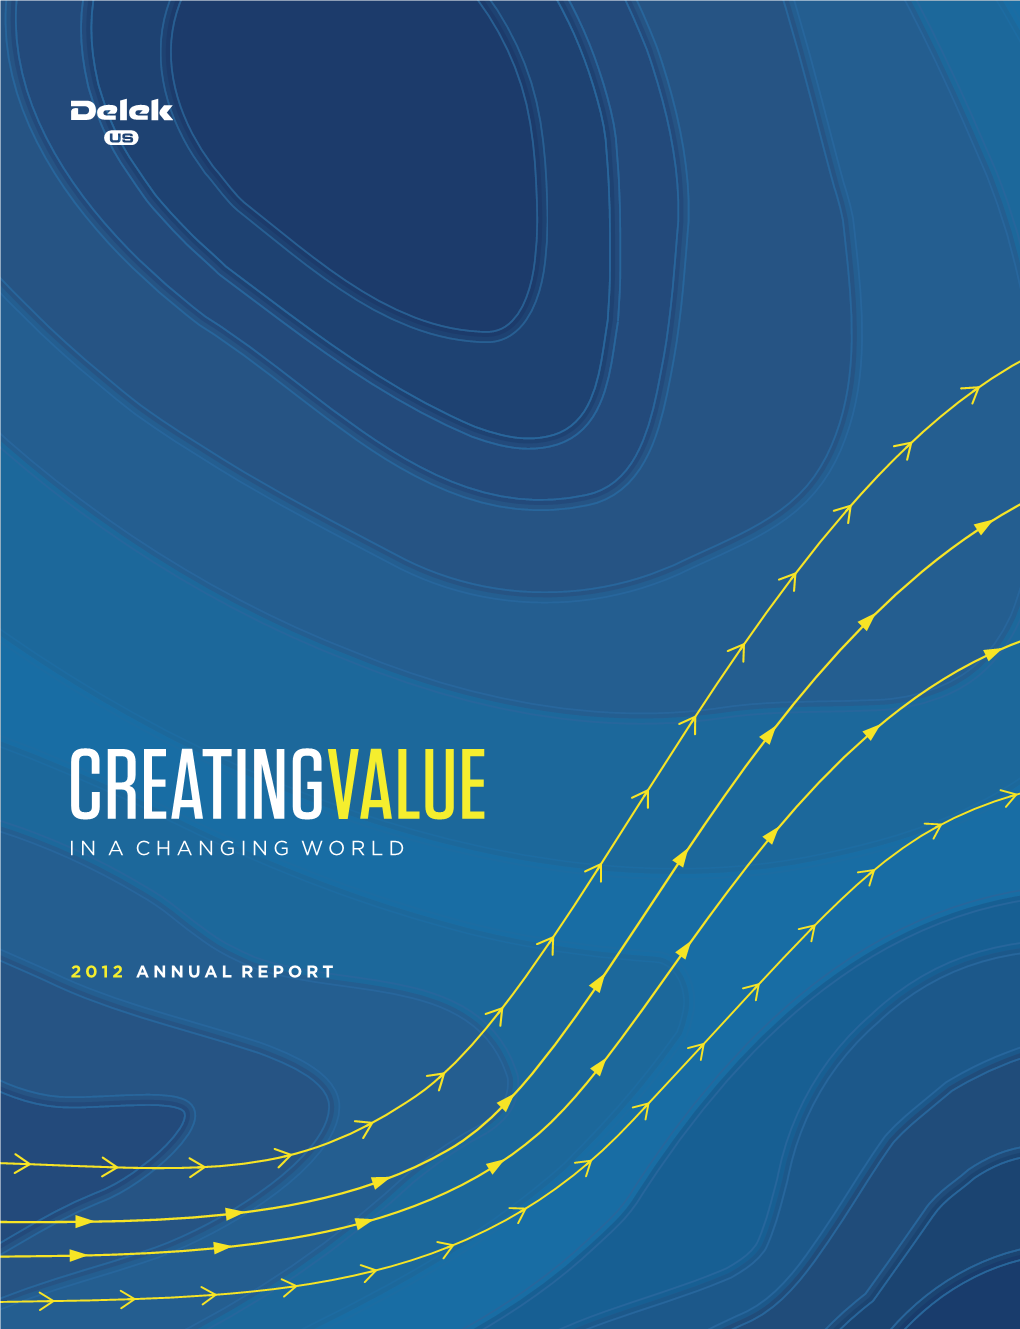 Creatingvalue in a Changing World